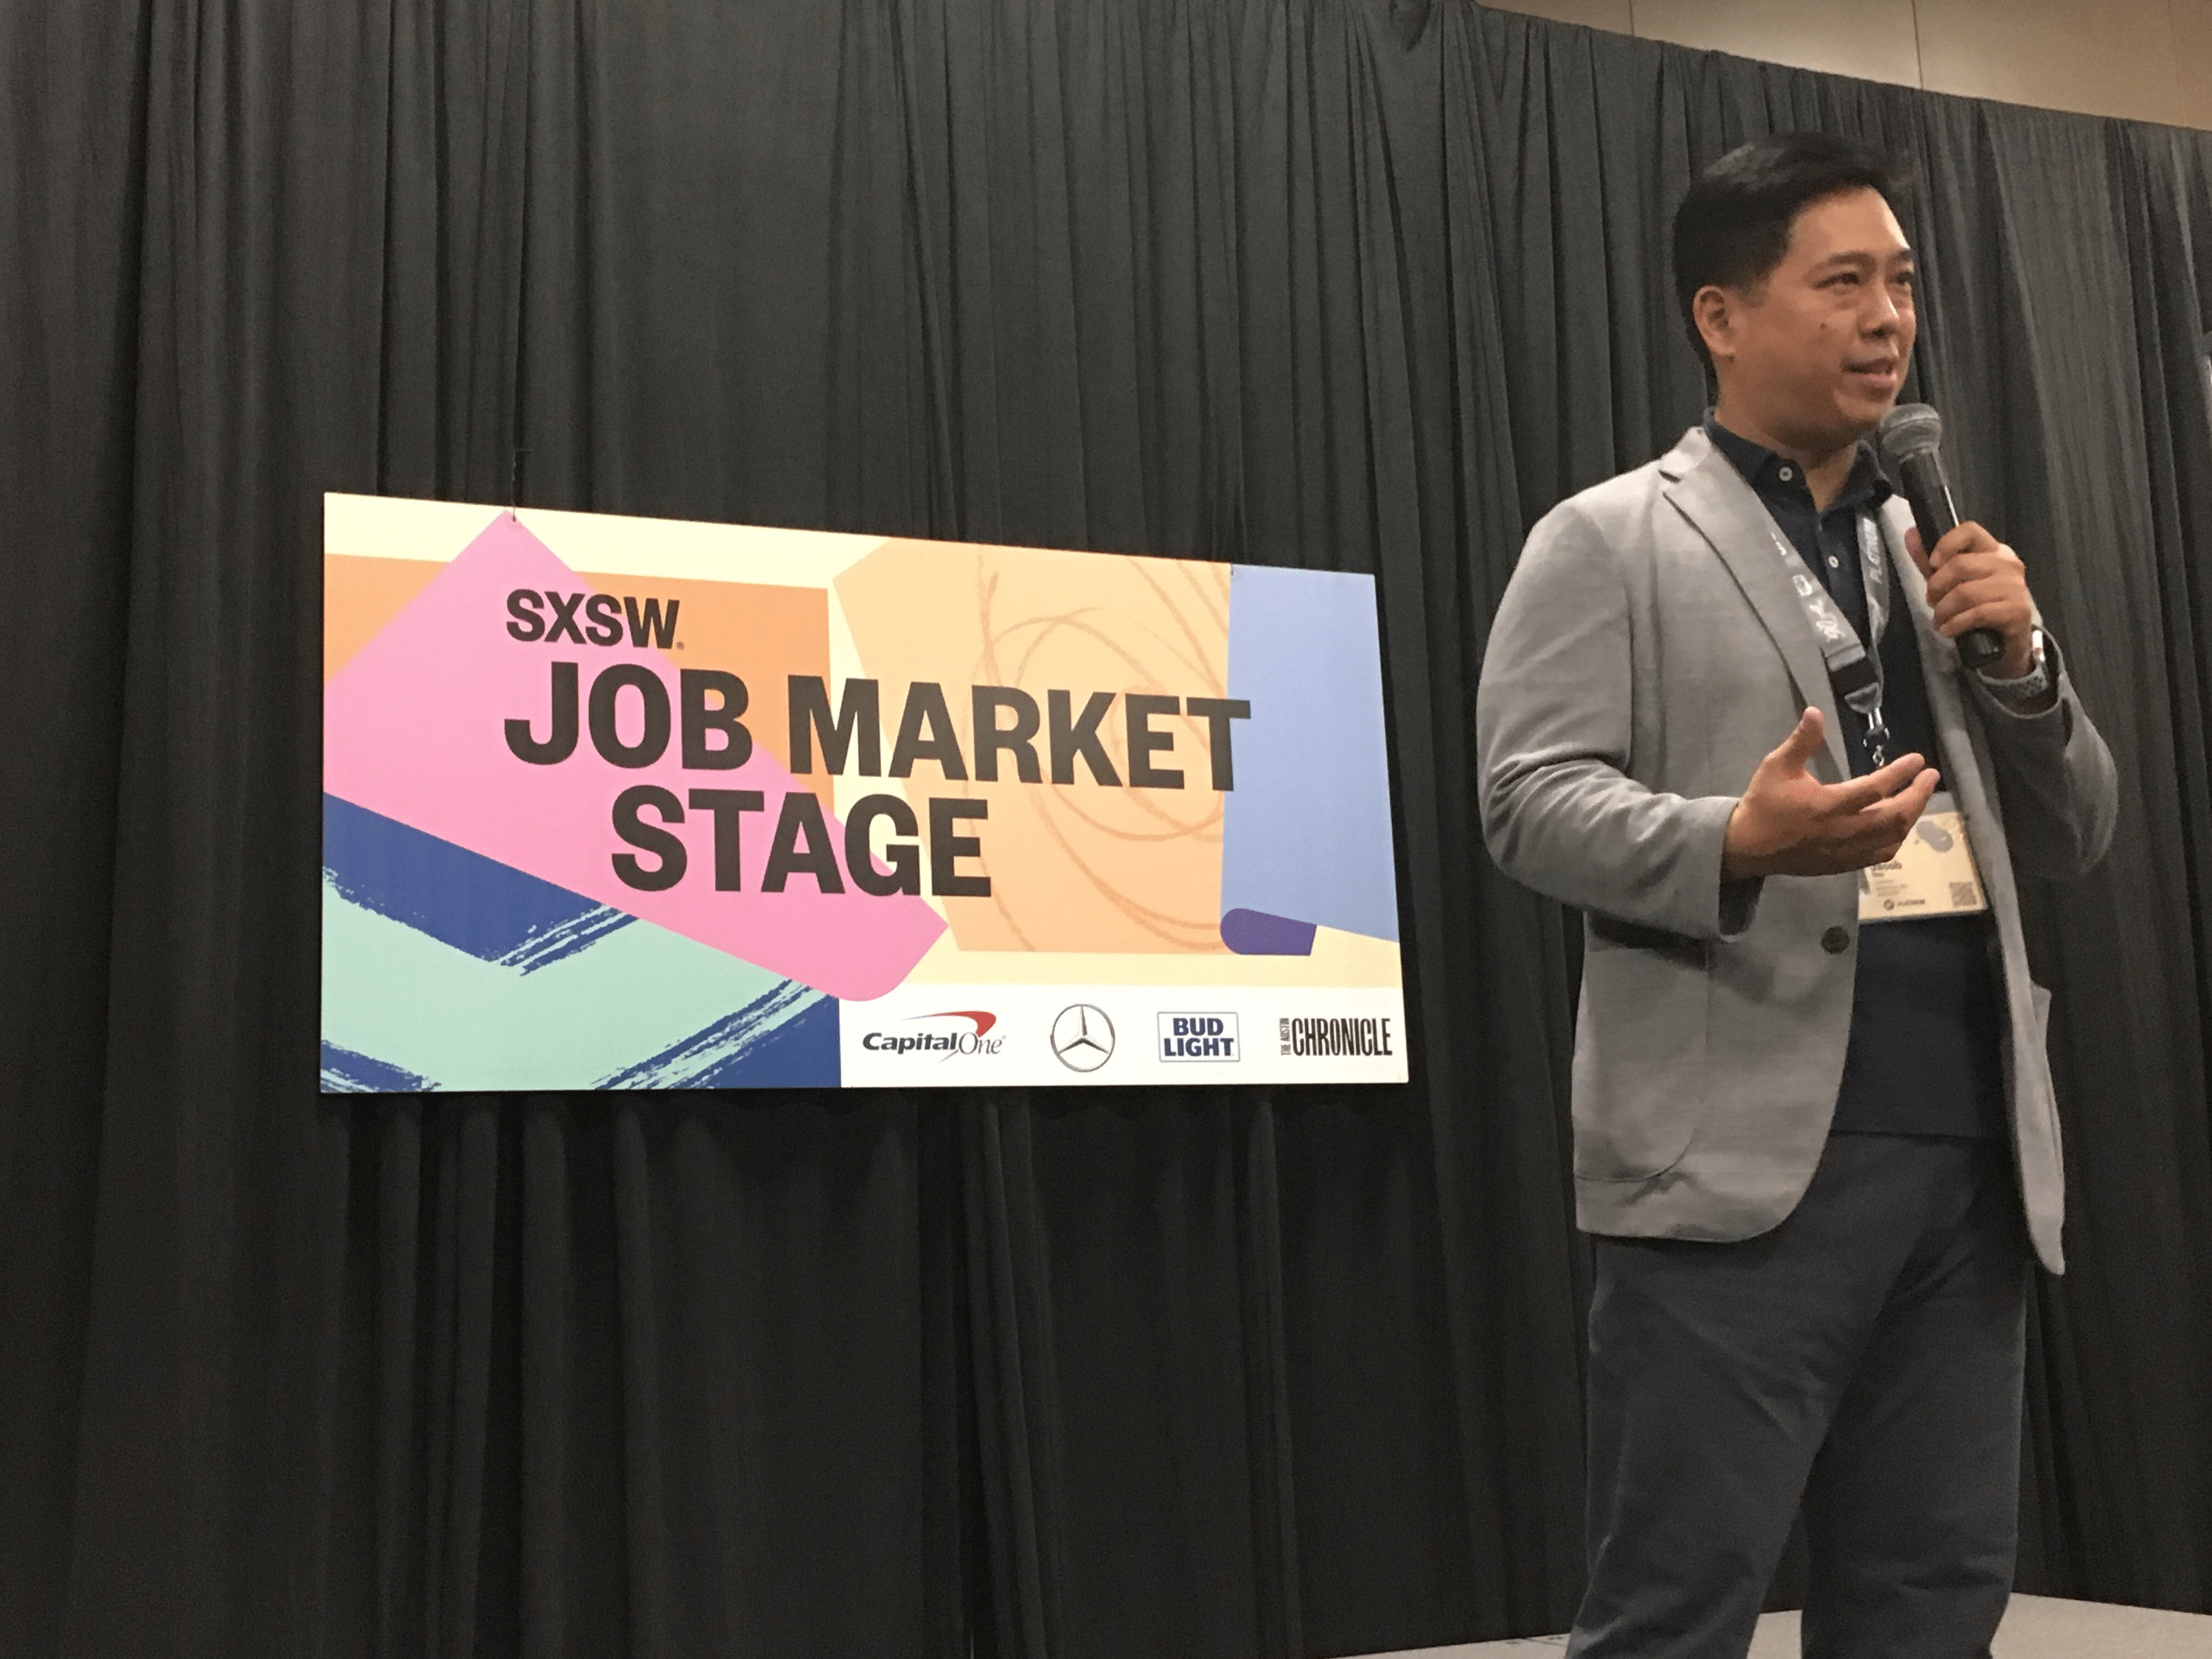 Catalyte CEO delivers his #KilltheResume talk at SXSW 2018 job market stage